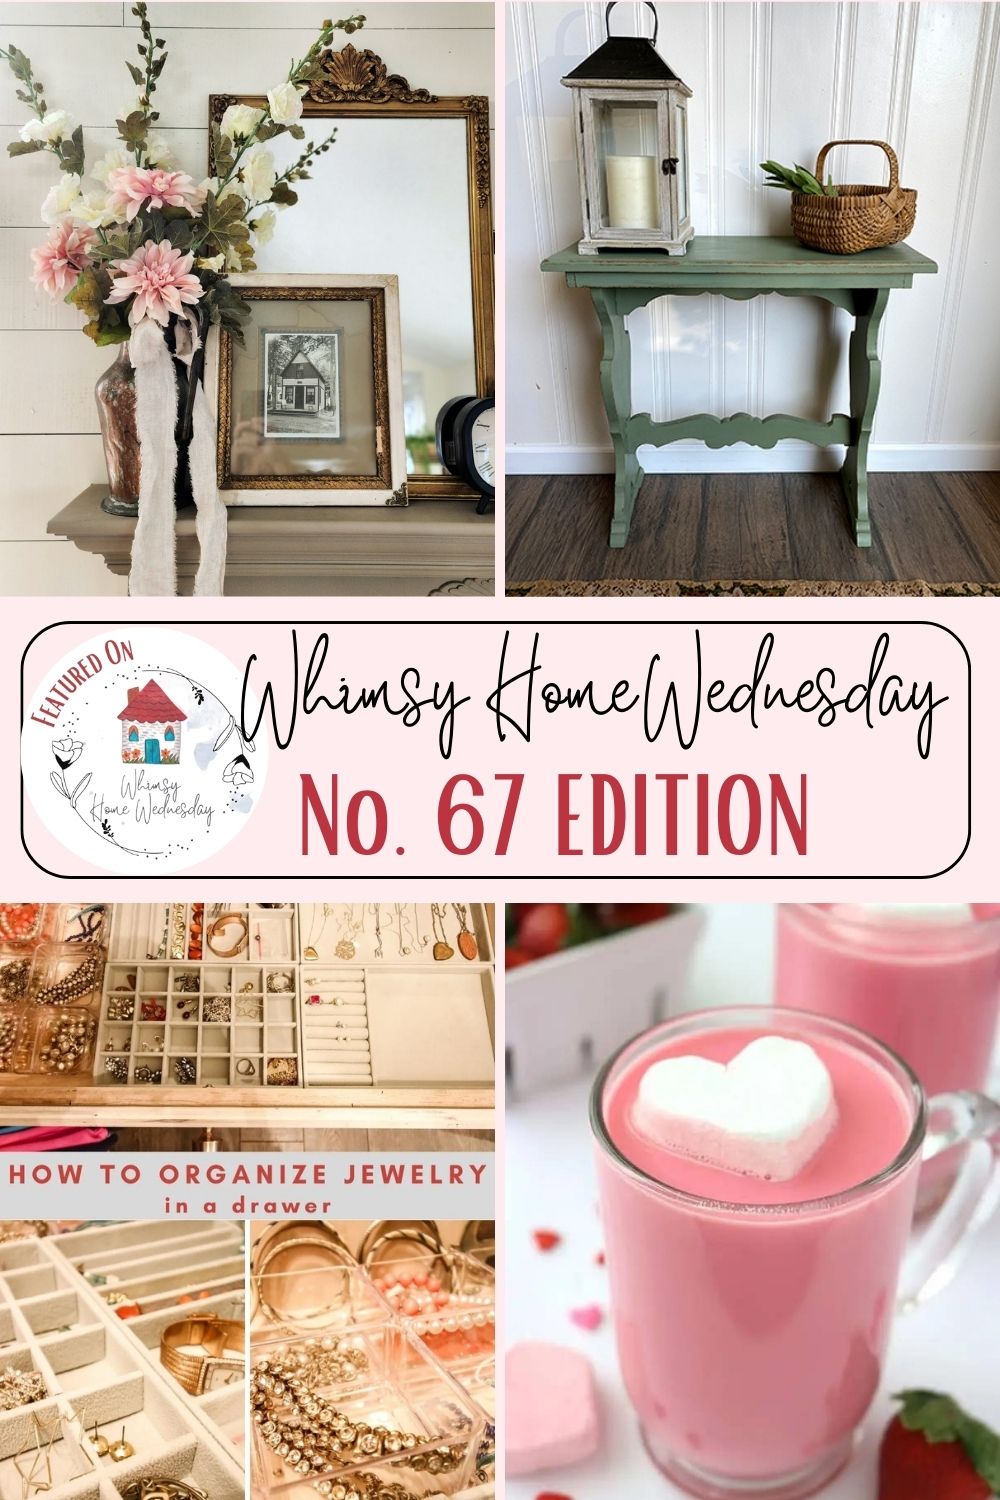 Join us on Whimsy Home Wednesday Blog Link Party No. 67 and see host projects, the features from the previous week and link up your posts!